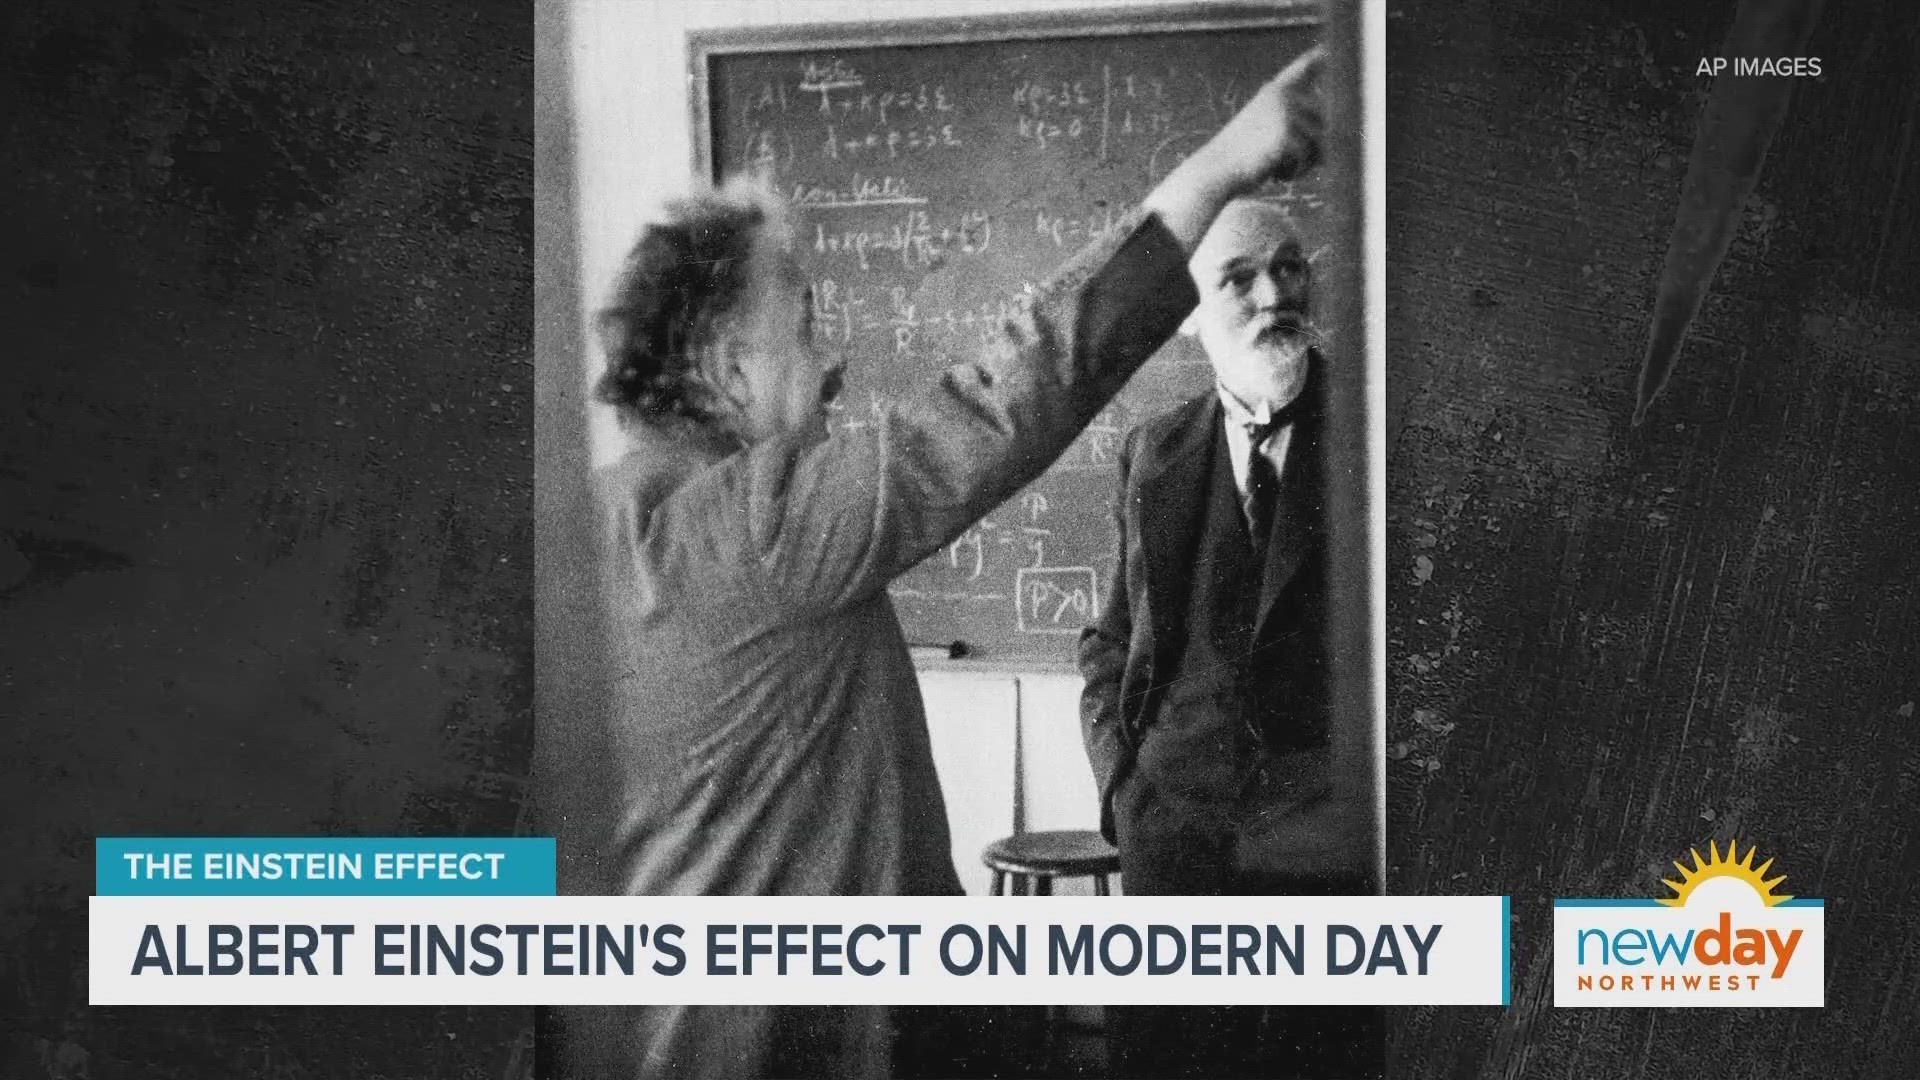 Benyamin Cohen, author of The Einstein Effect, is the manager of Einstein’s official social media accounts.